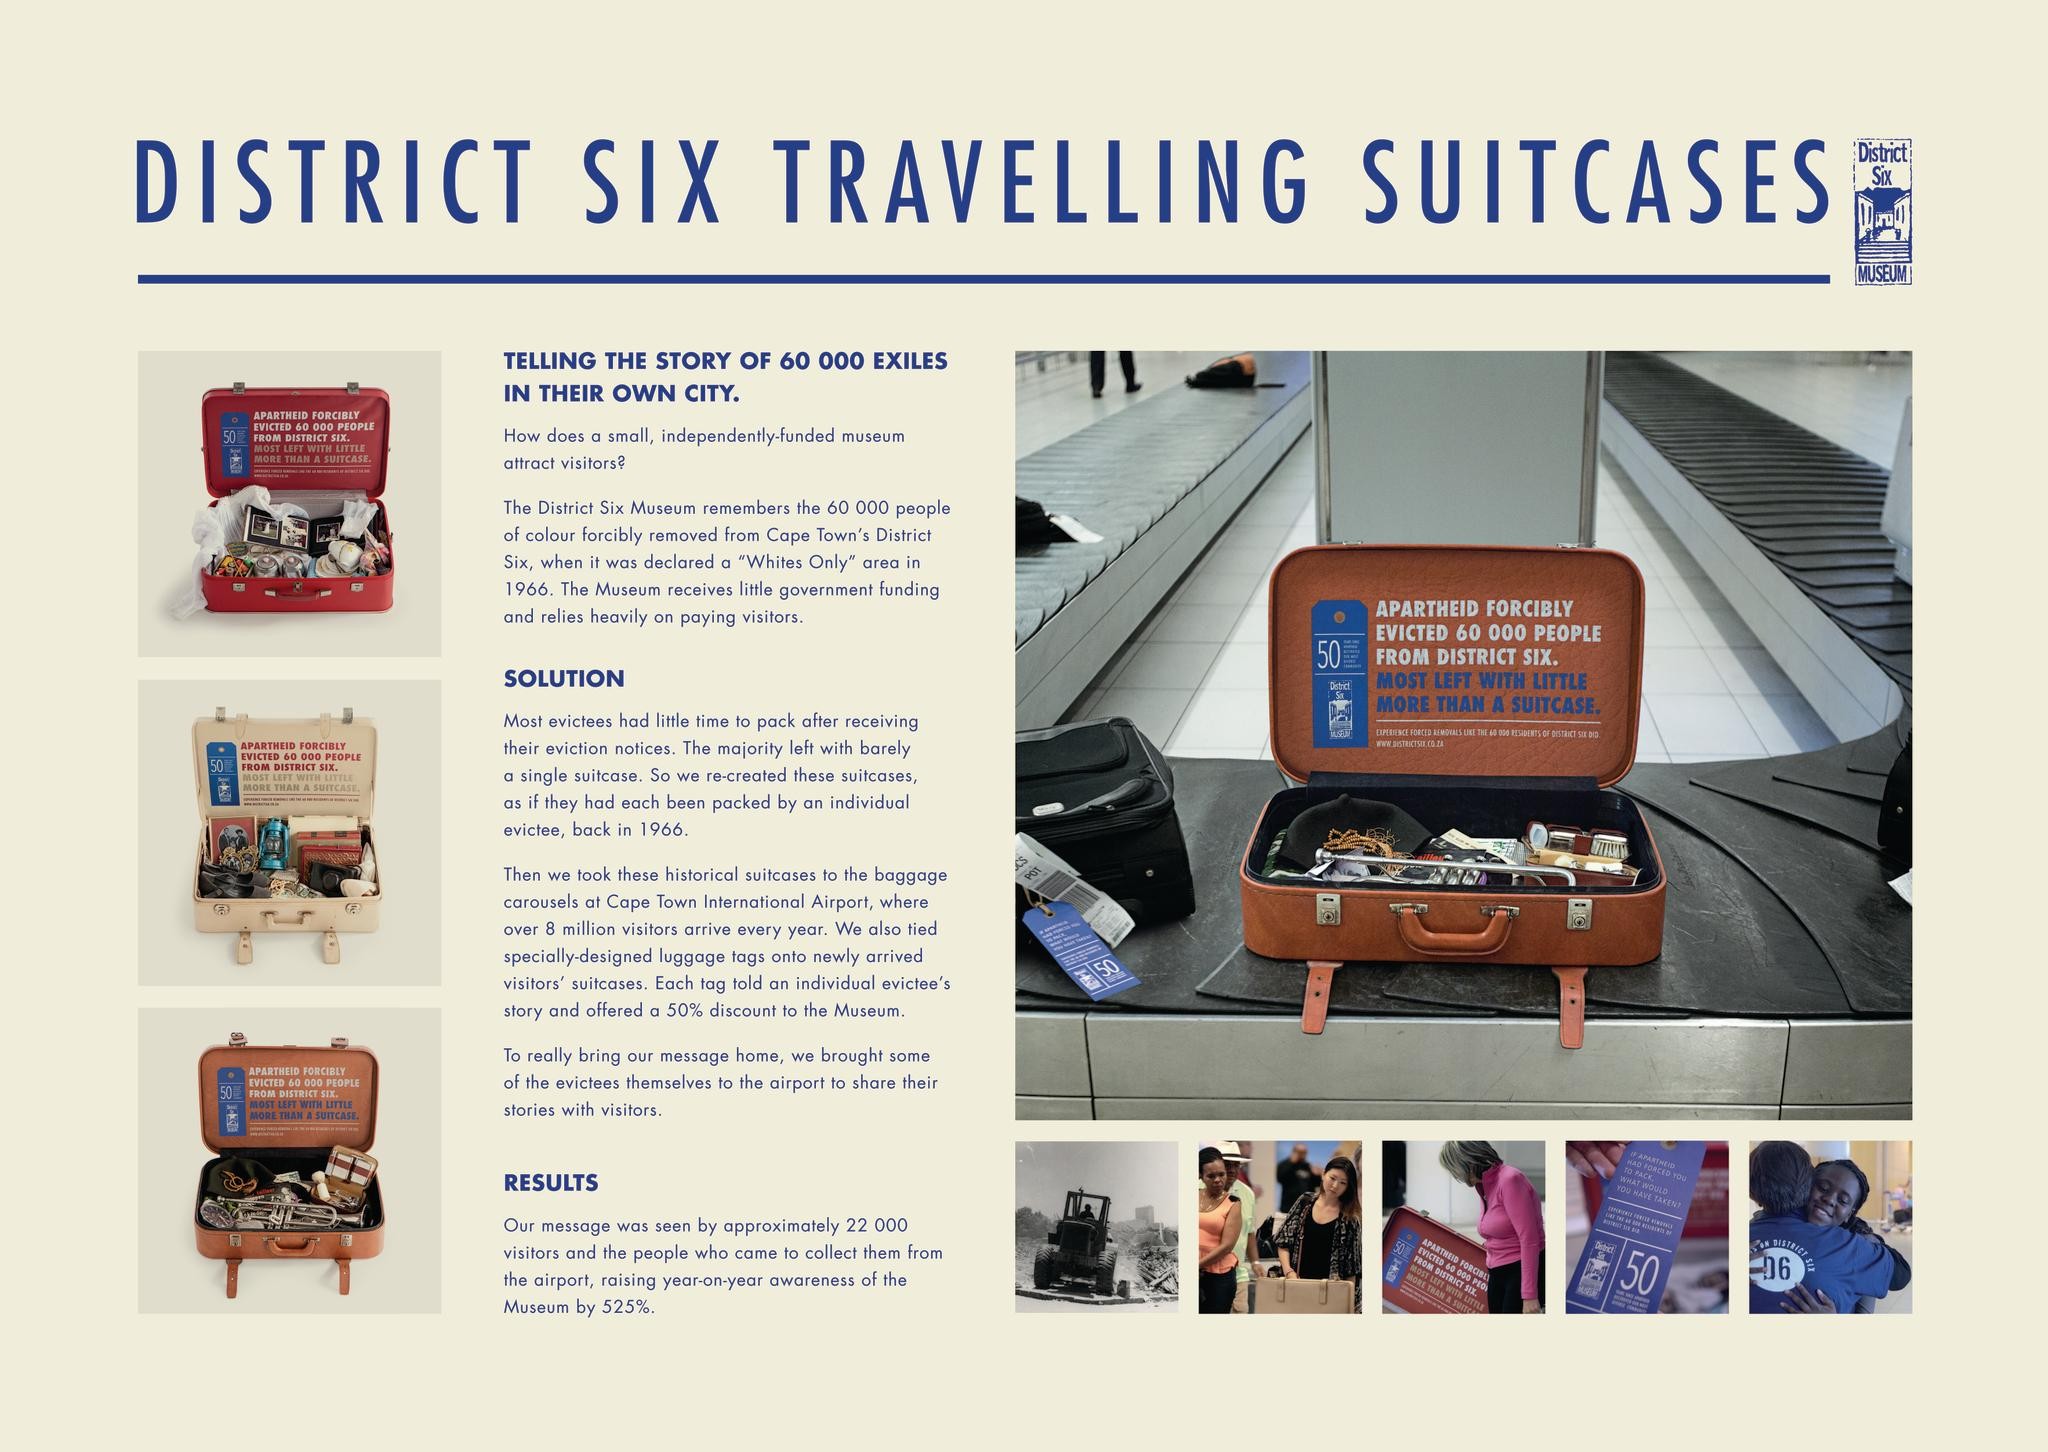 DISTRICT SIX TRAVELLING SUITCASES